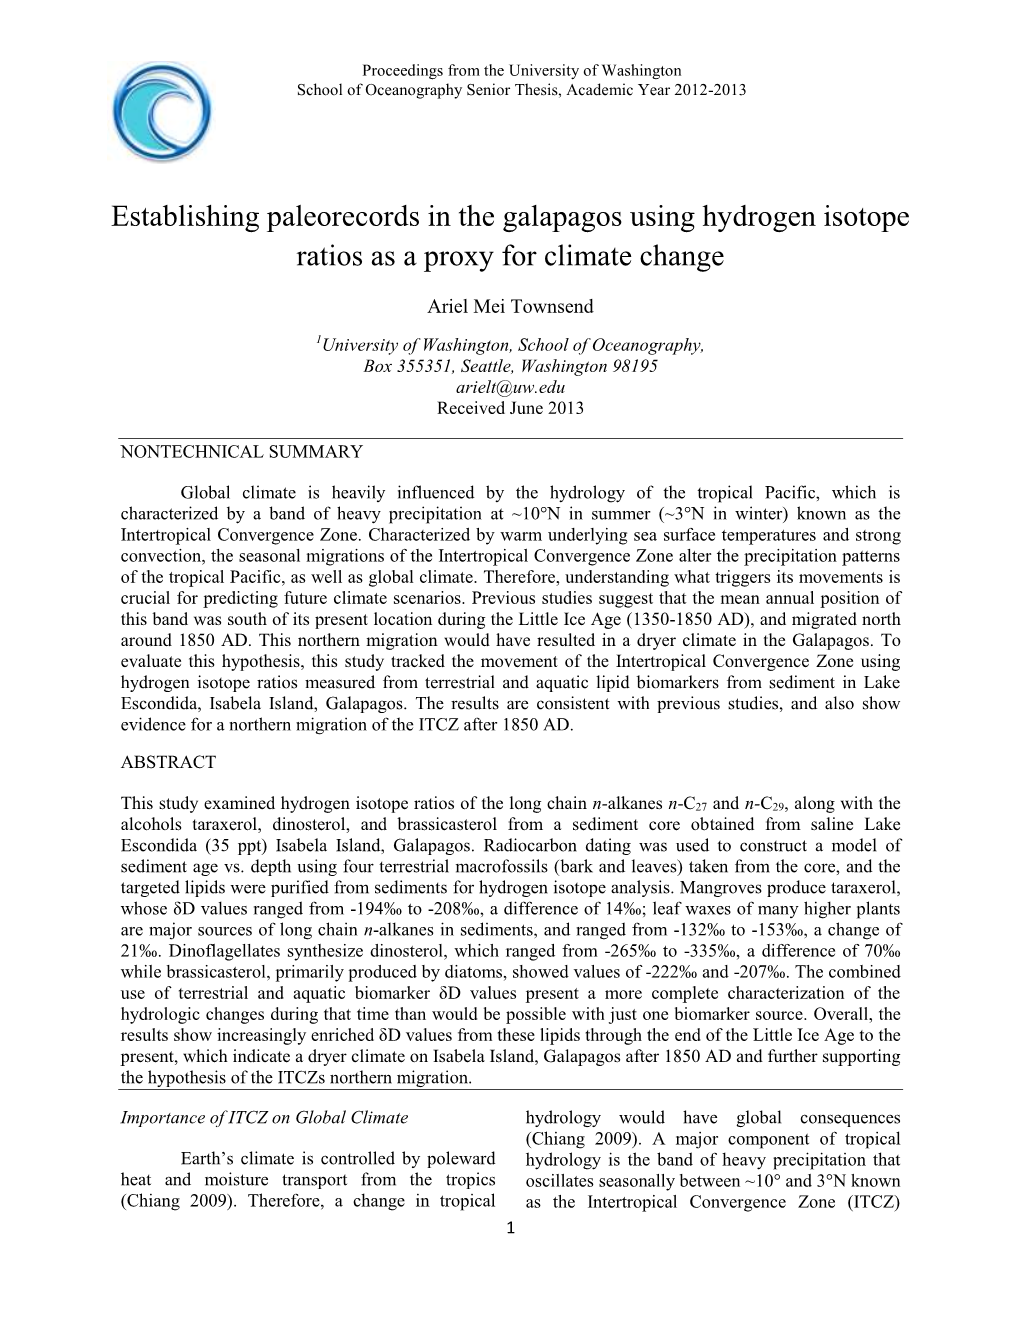 Establishing Paleorecords in the Galapagos Using Hydrogen Isotope Ratios As a Proxy for Climate Change